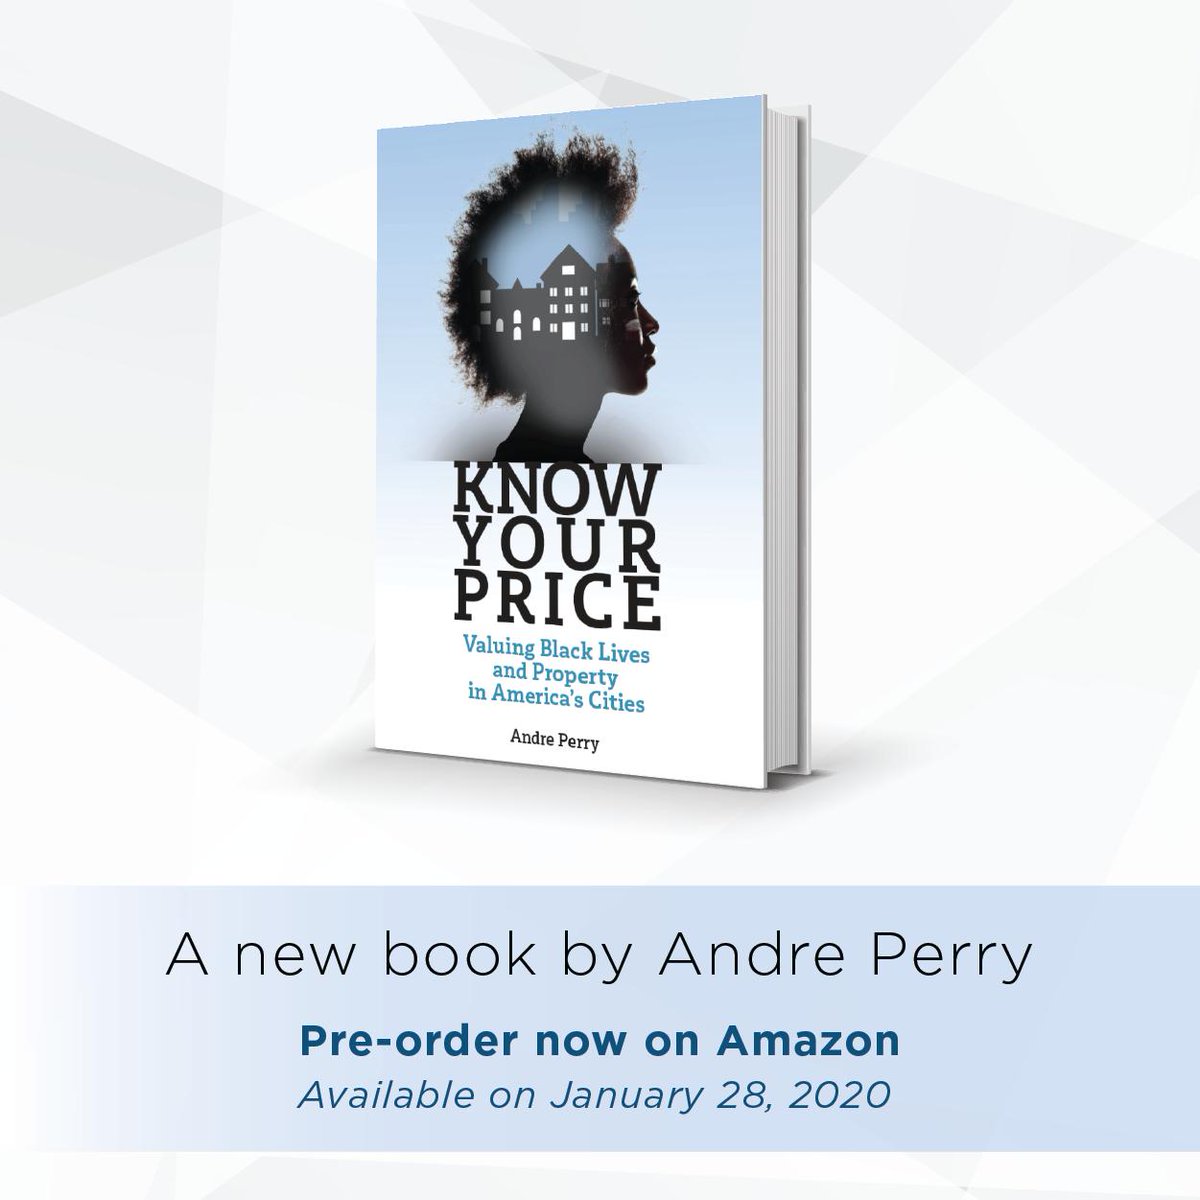 I can’t express how happy I am to reveal the book cover of KNOW YOUR PRICE, coming January 2020 @BrookingsPress. This book reflects my love of community. We will be armed with information. Pre-order here: amazon.com/Know-Your-Pric… #KNOWYOURPRICE @BrookingsInst